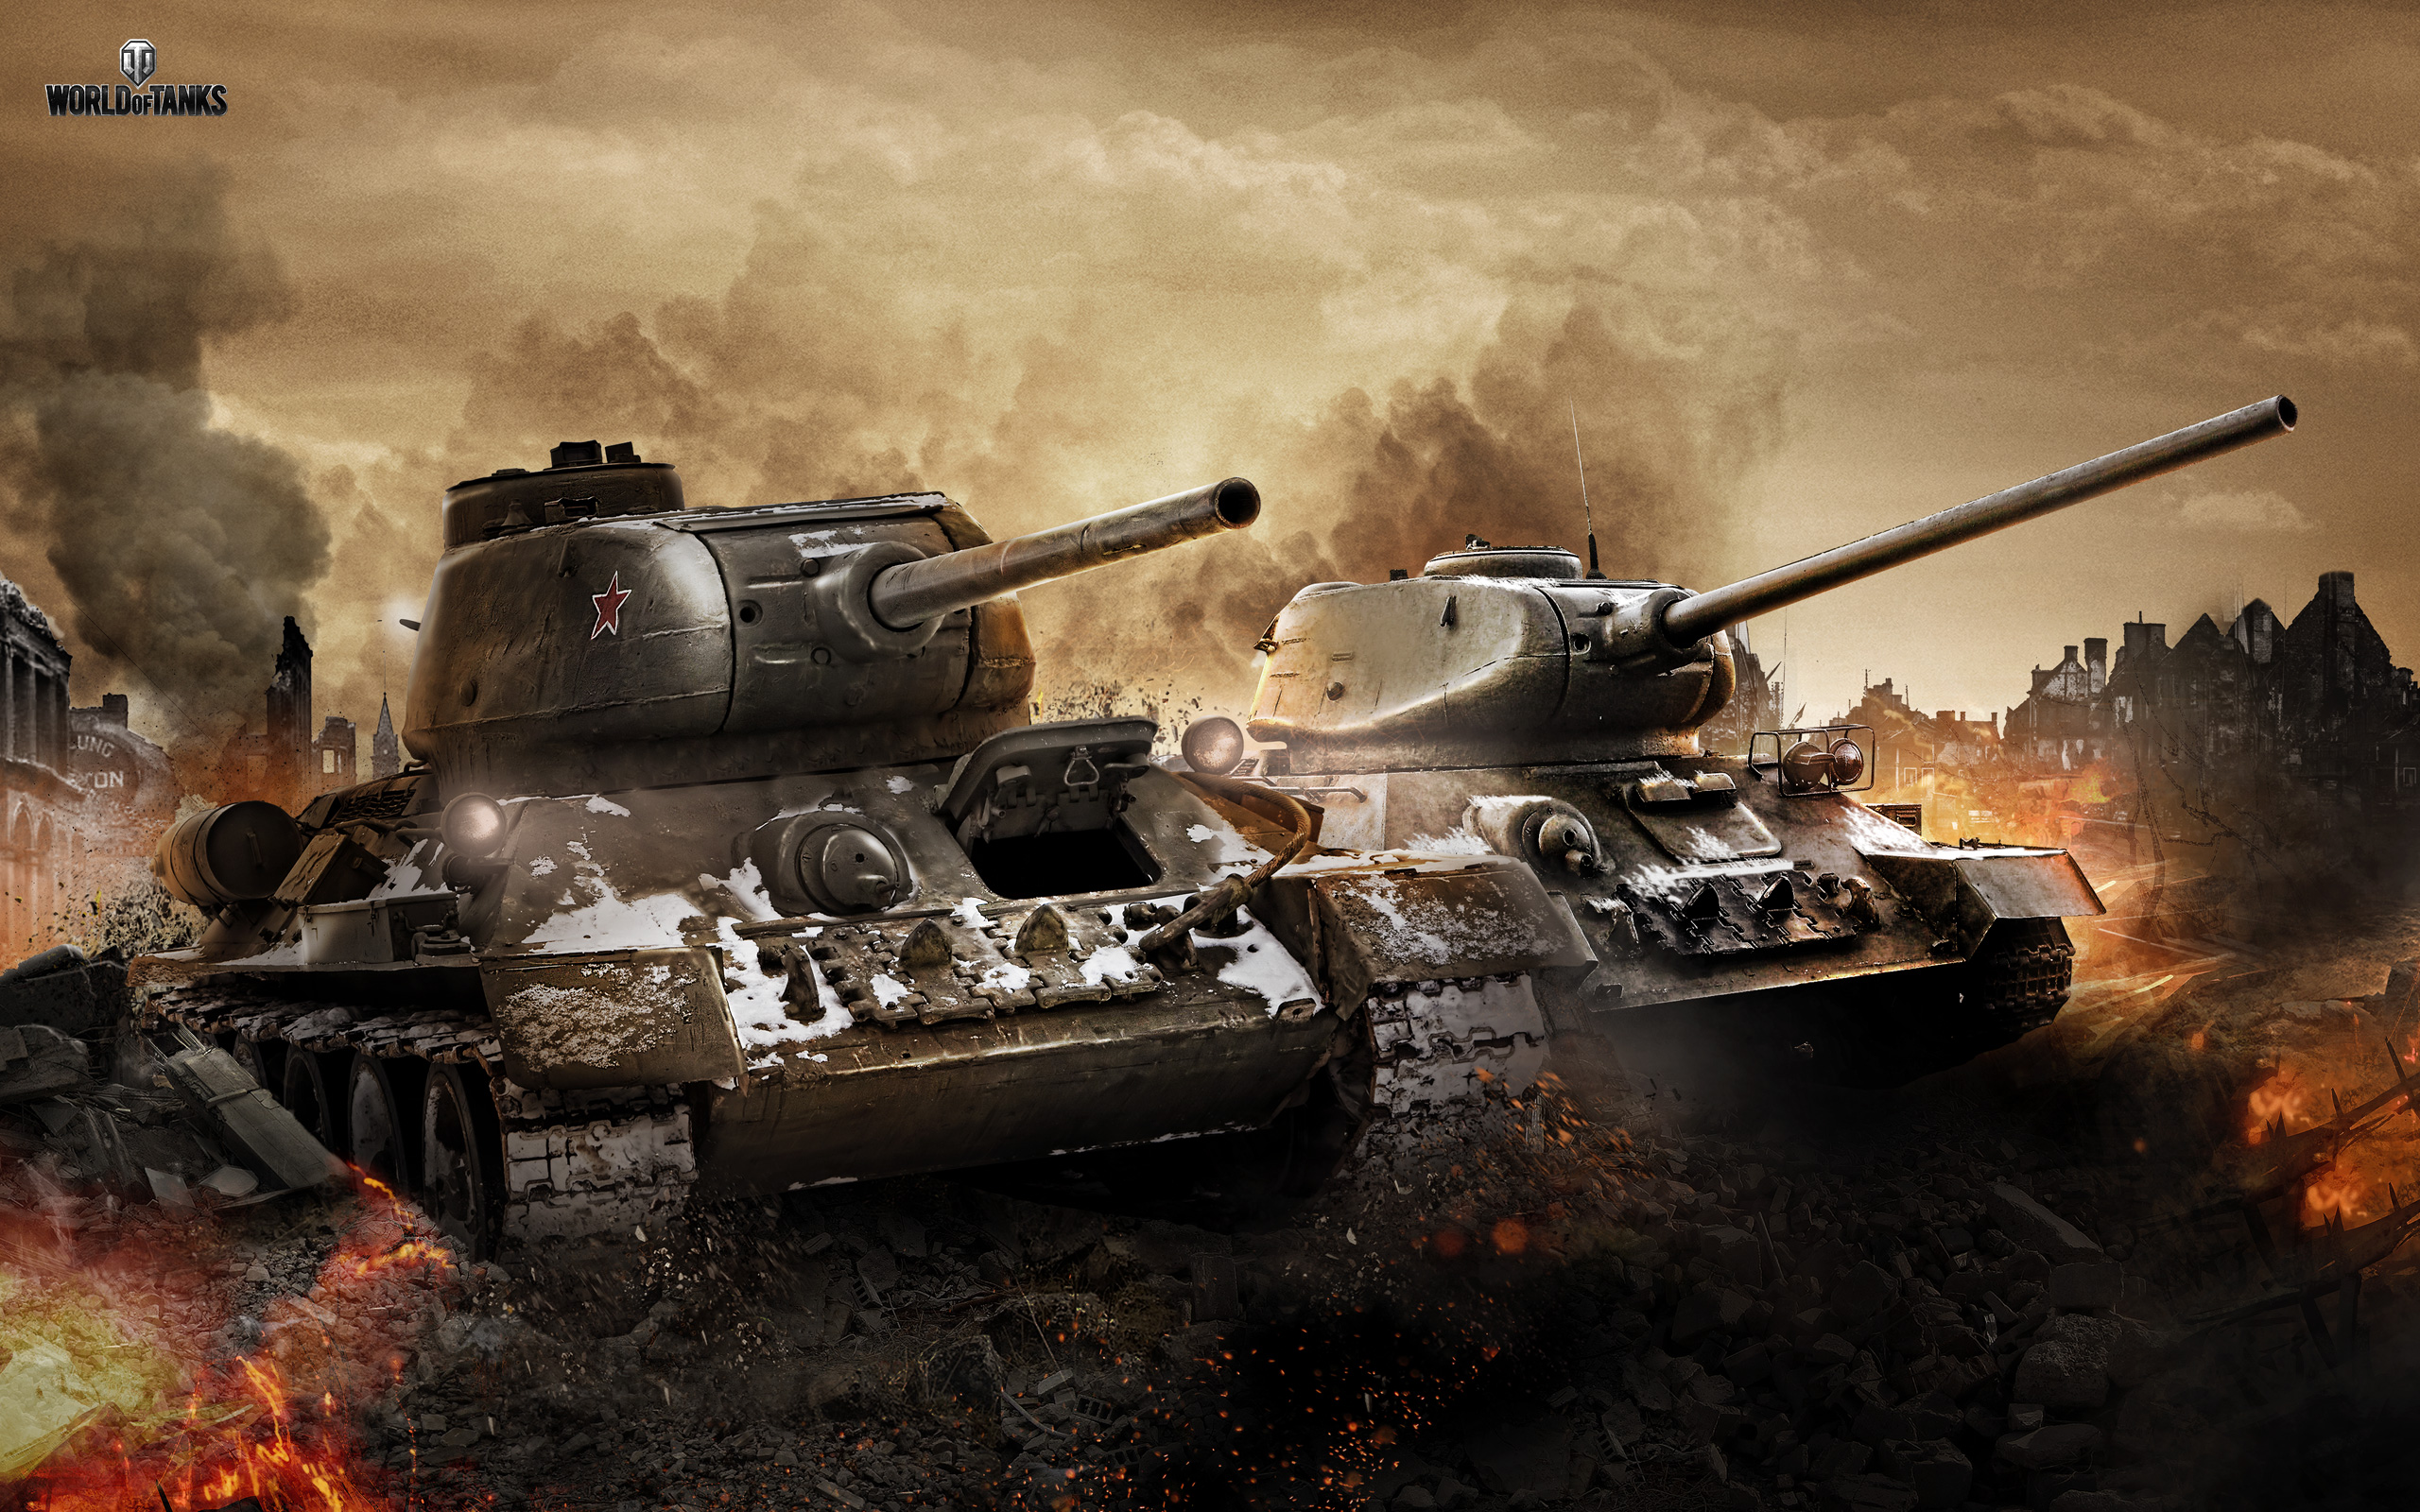 Tank of the Month May 2013: T-34 & T-34-85